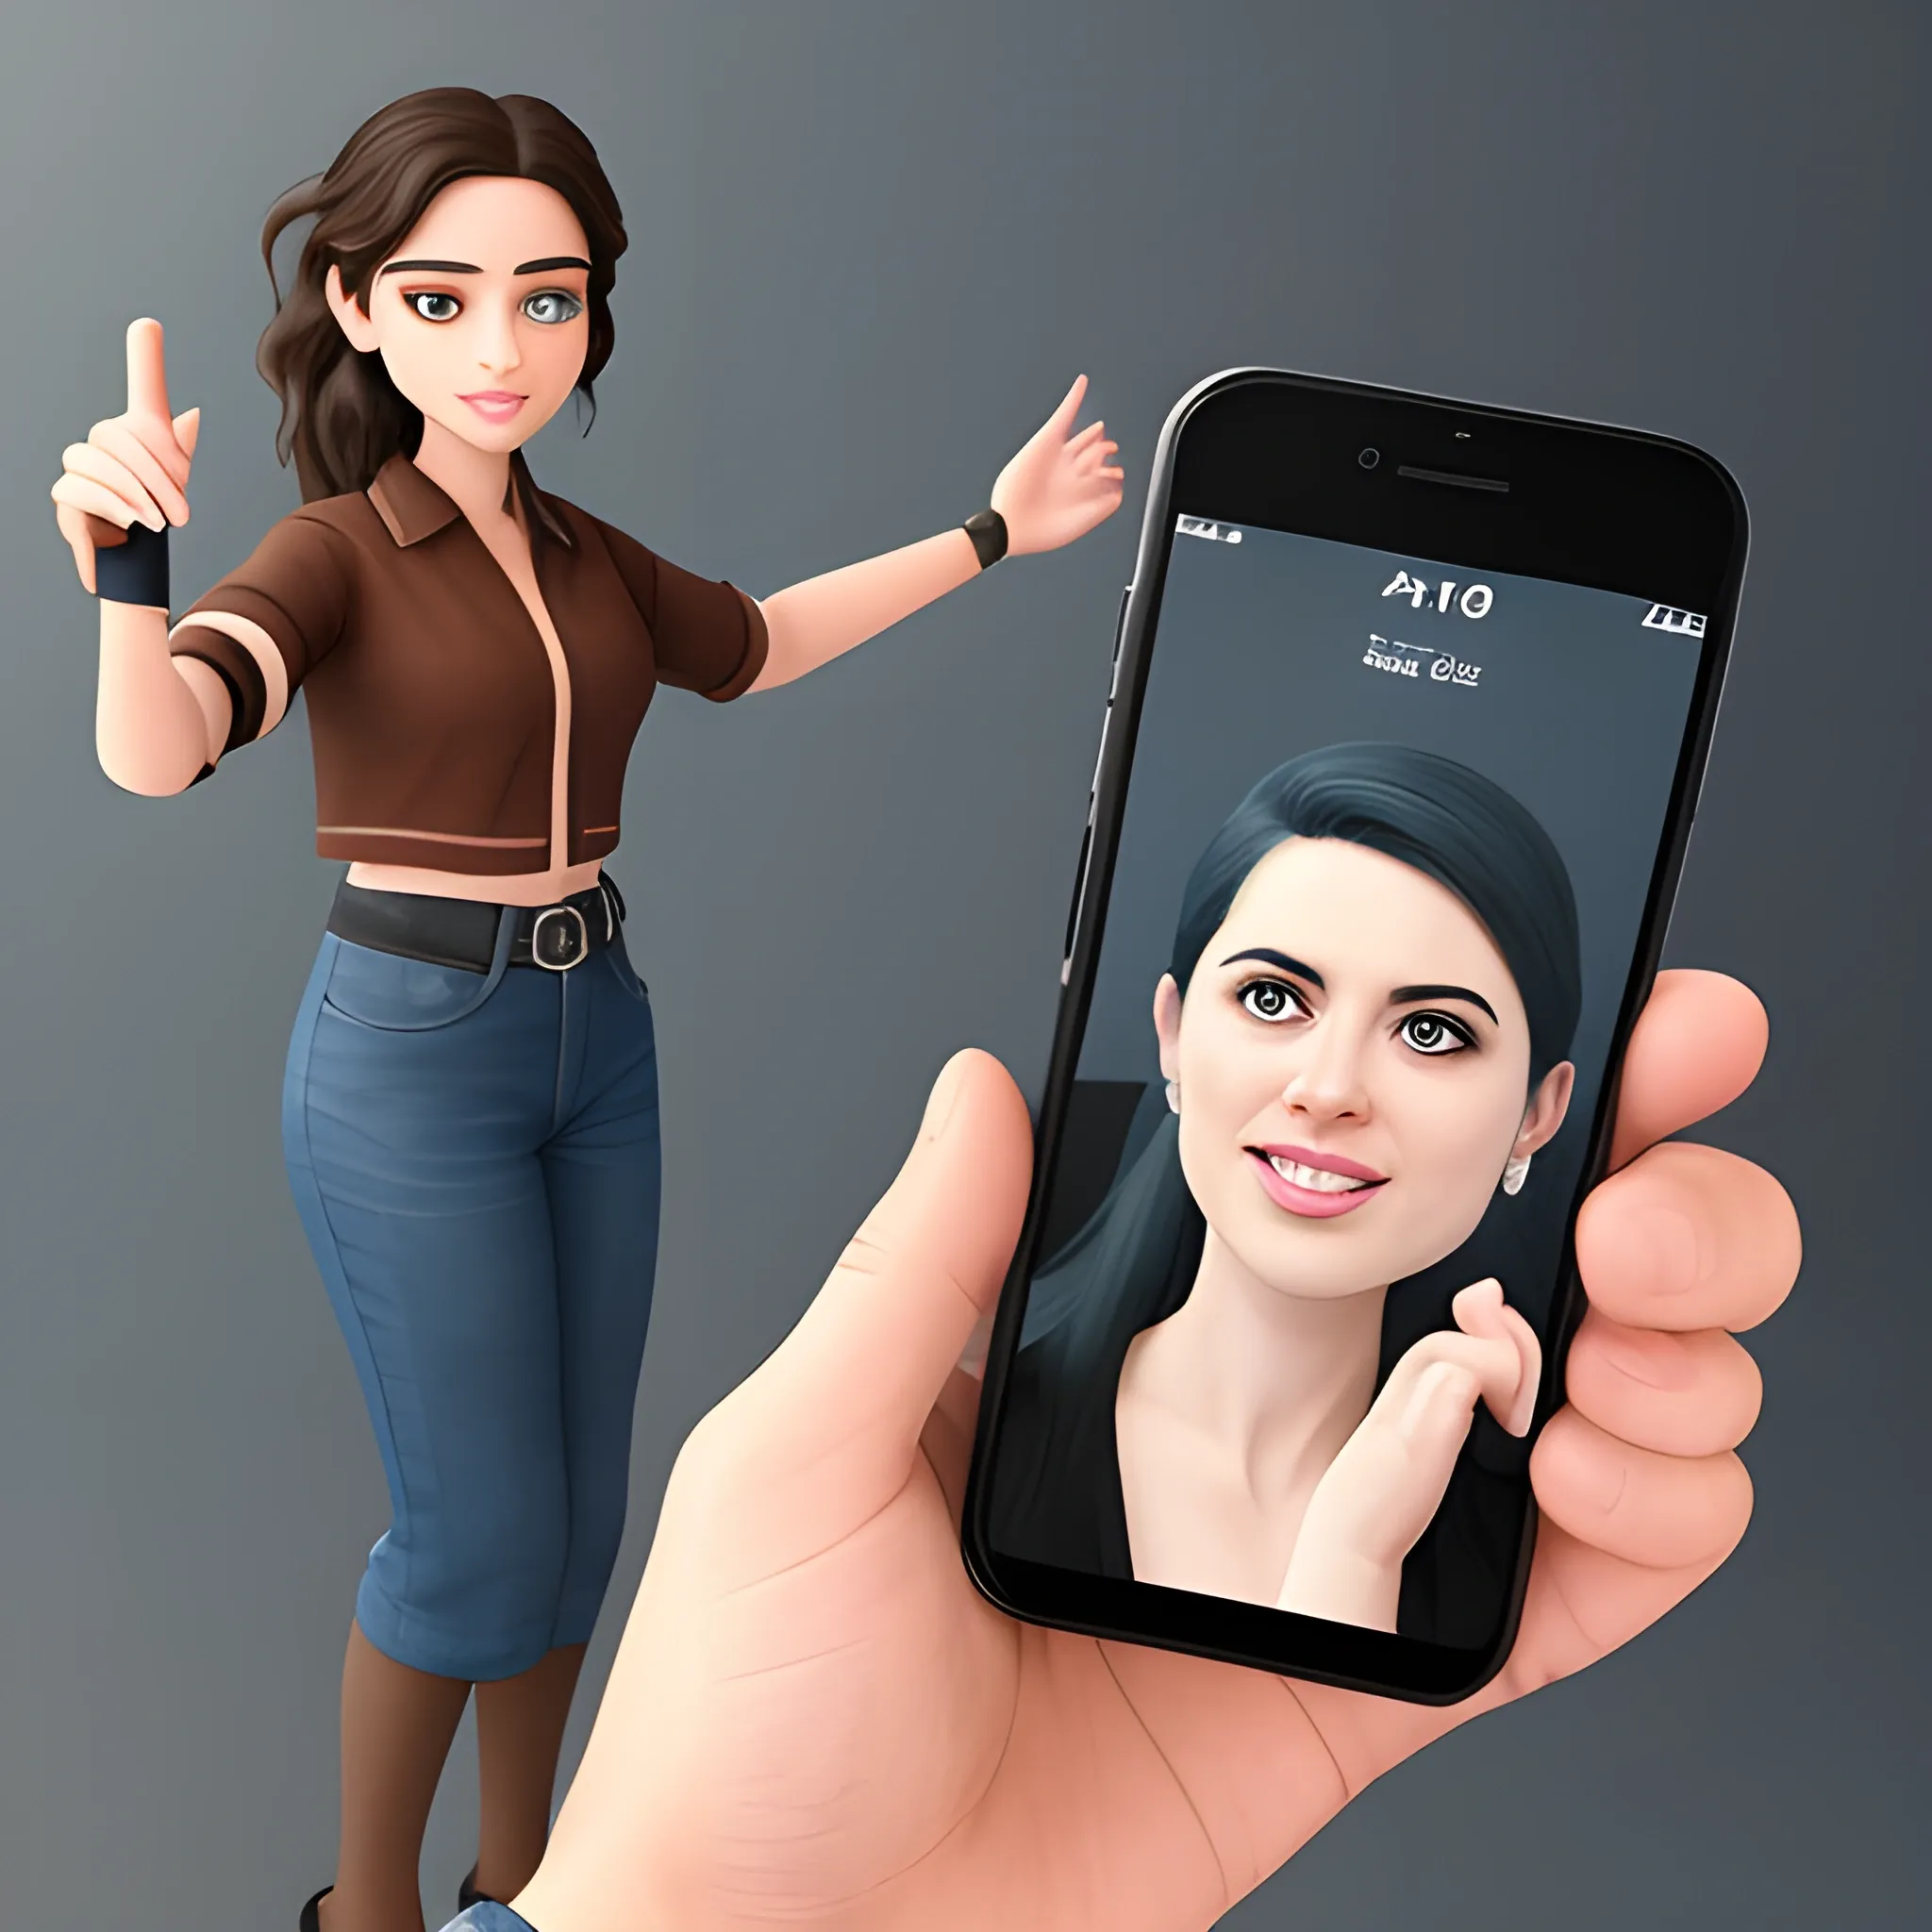 khaby lame realistic version holding a phone in one hand and the other is pointing out to the hand with the phone
